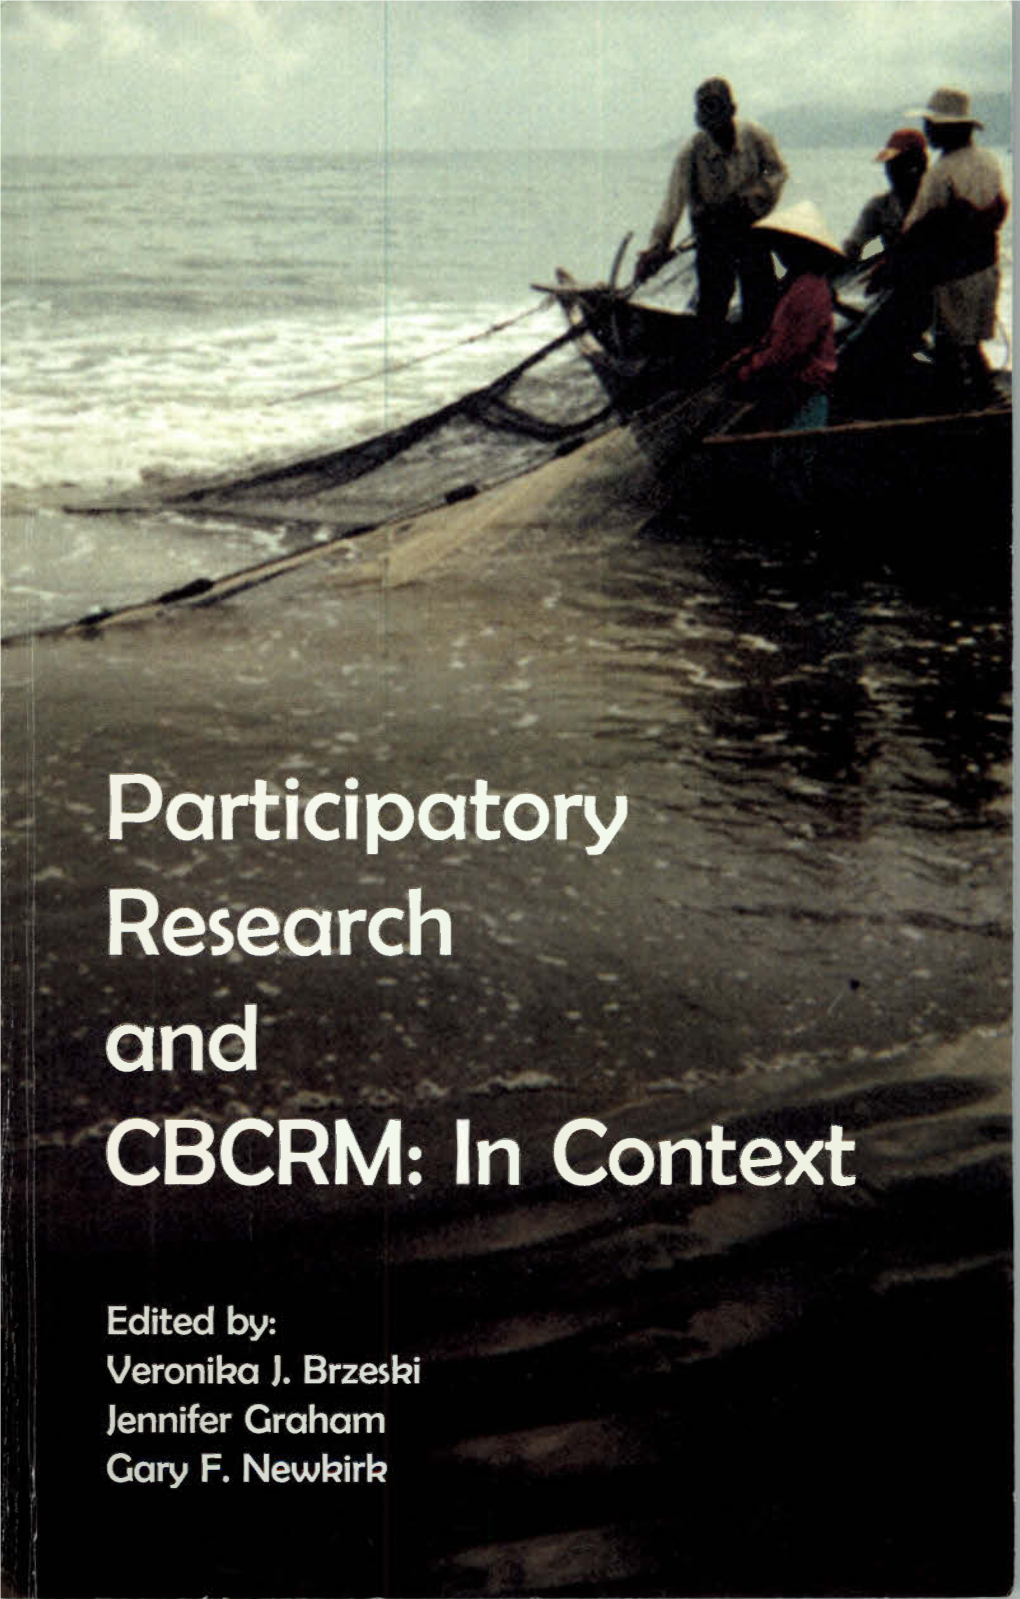 Participatory Research and CBCRM: in Context